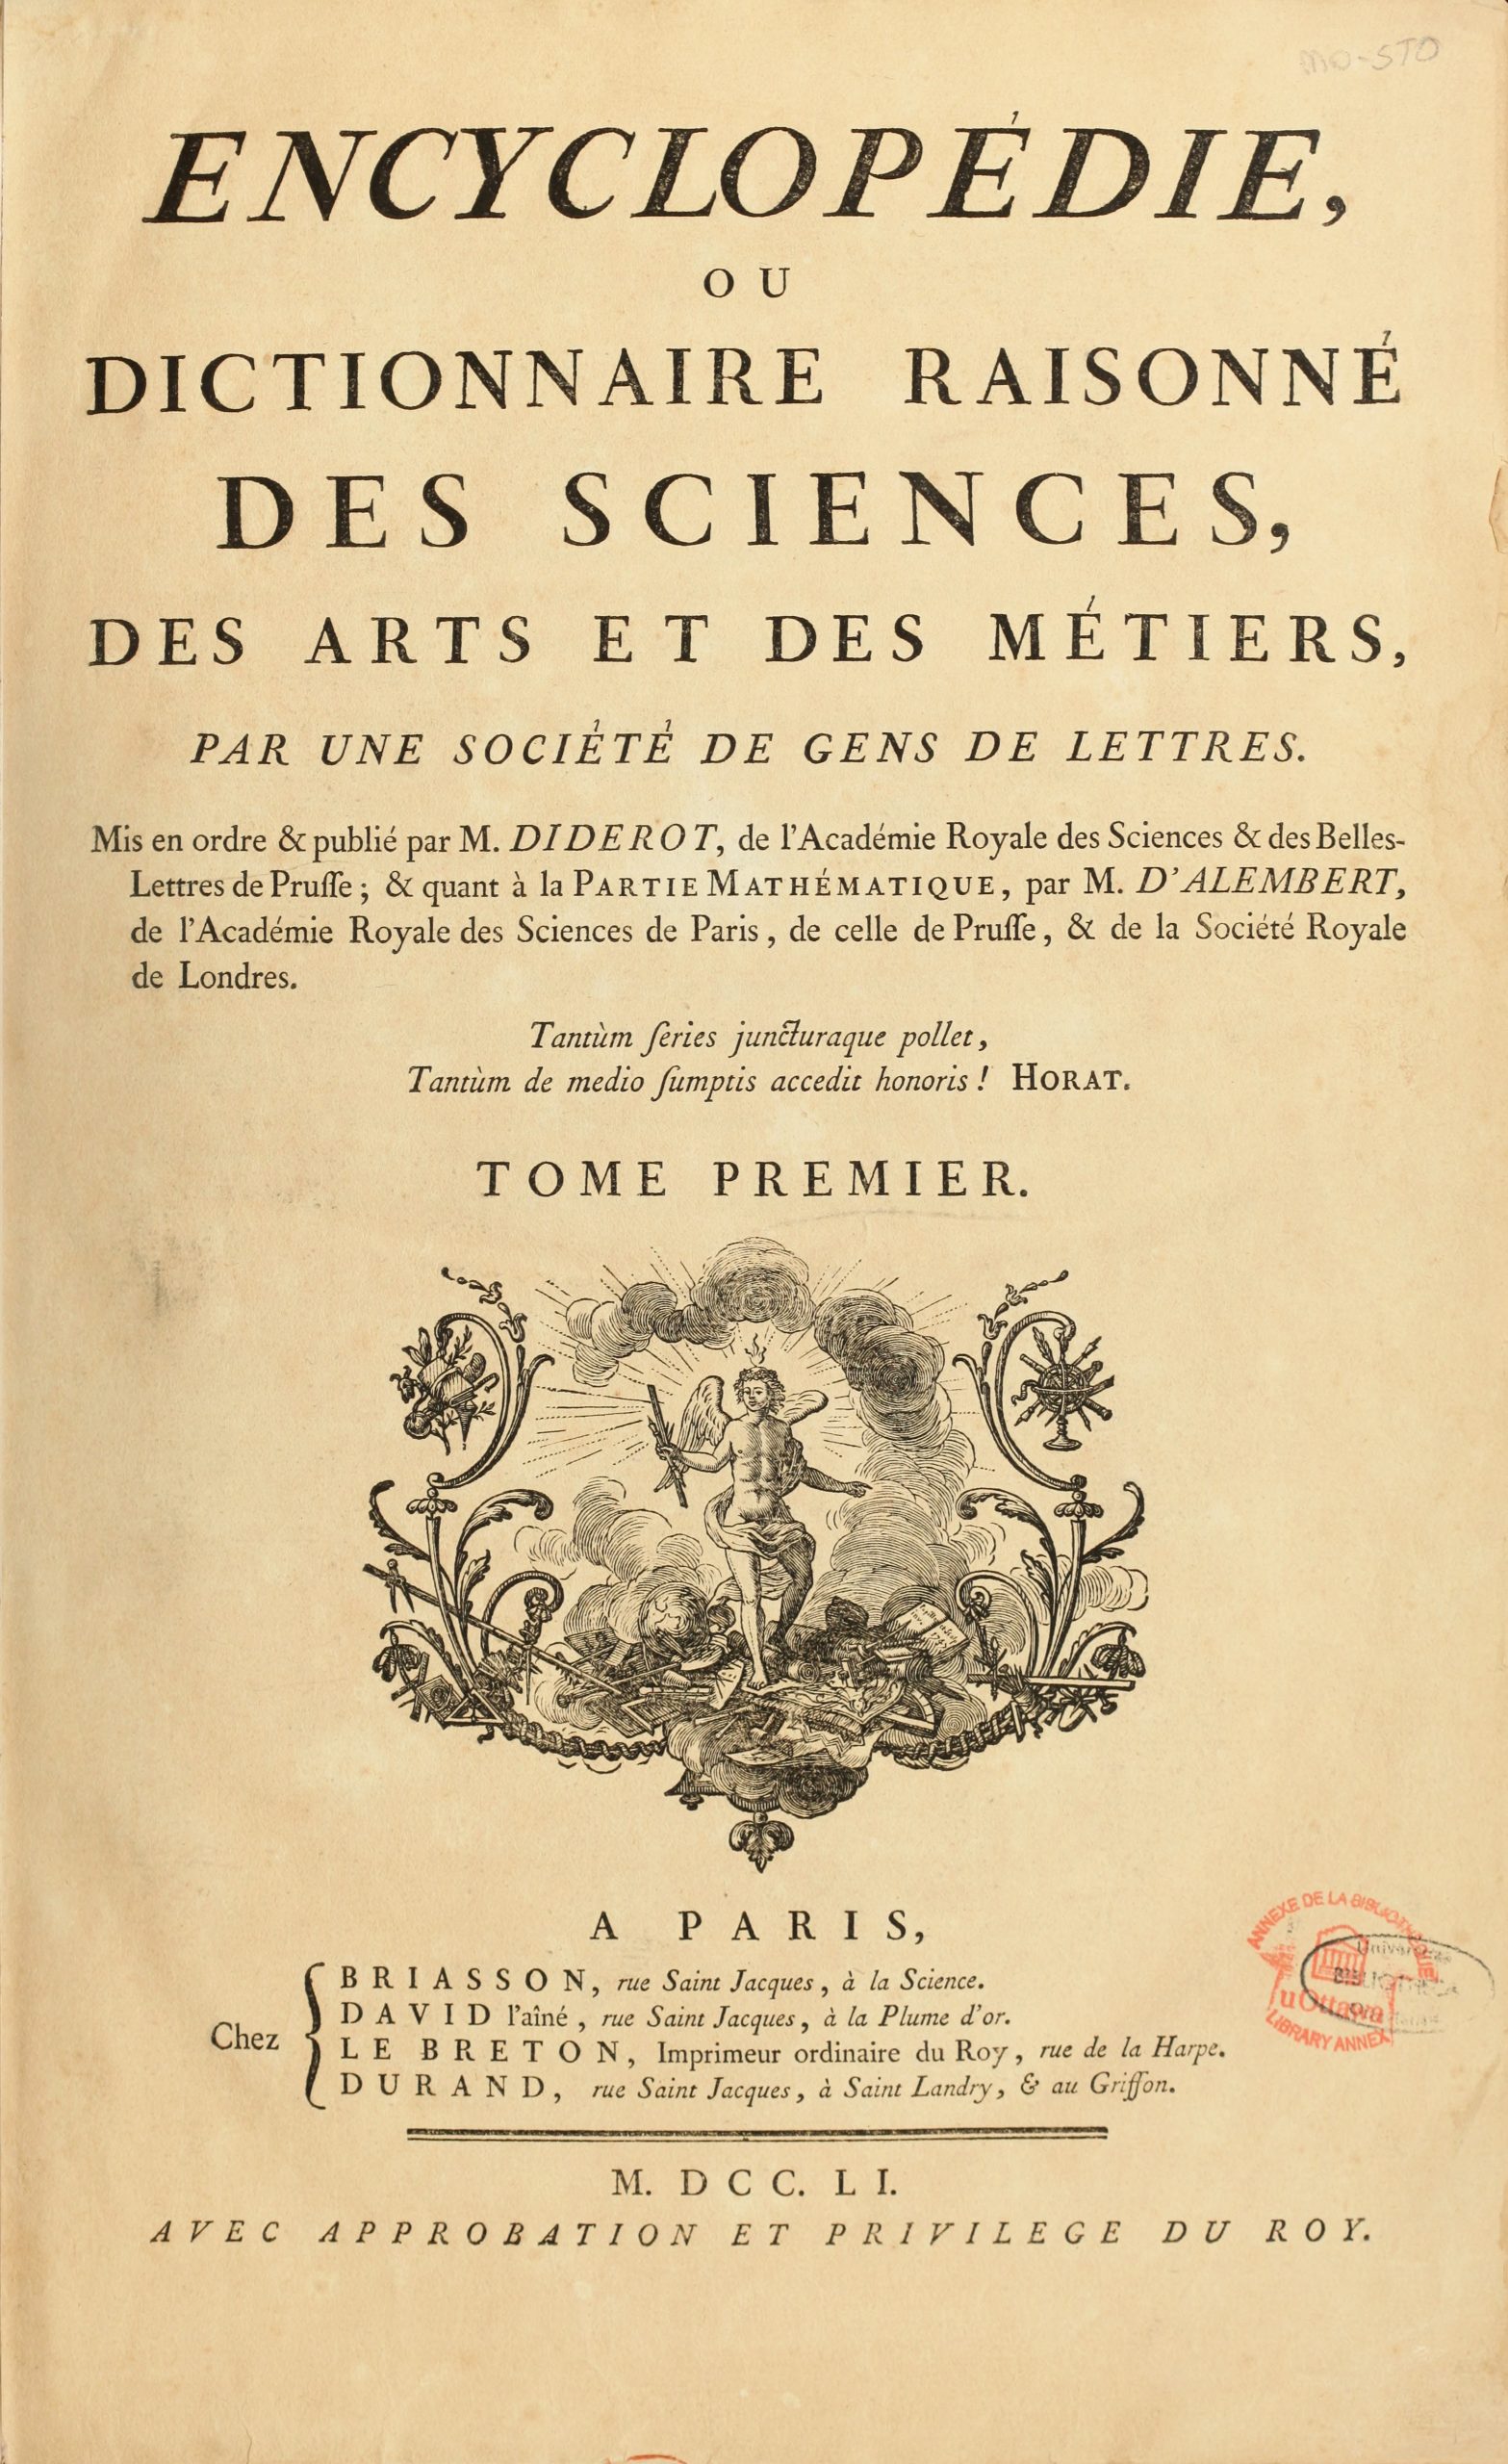 Image of the front cover of the Encyclopedie written by Diderot and D'Alembert